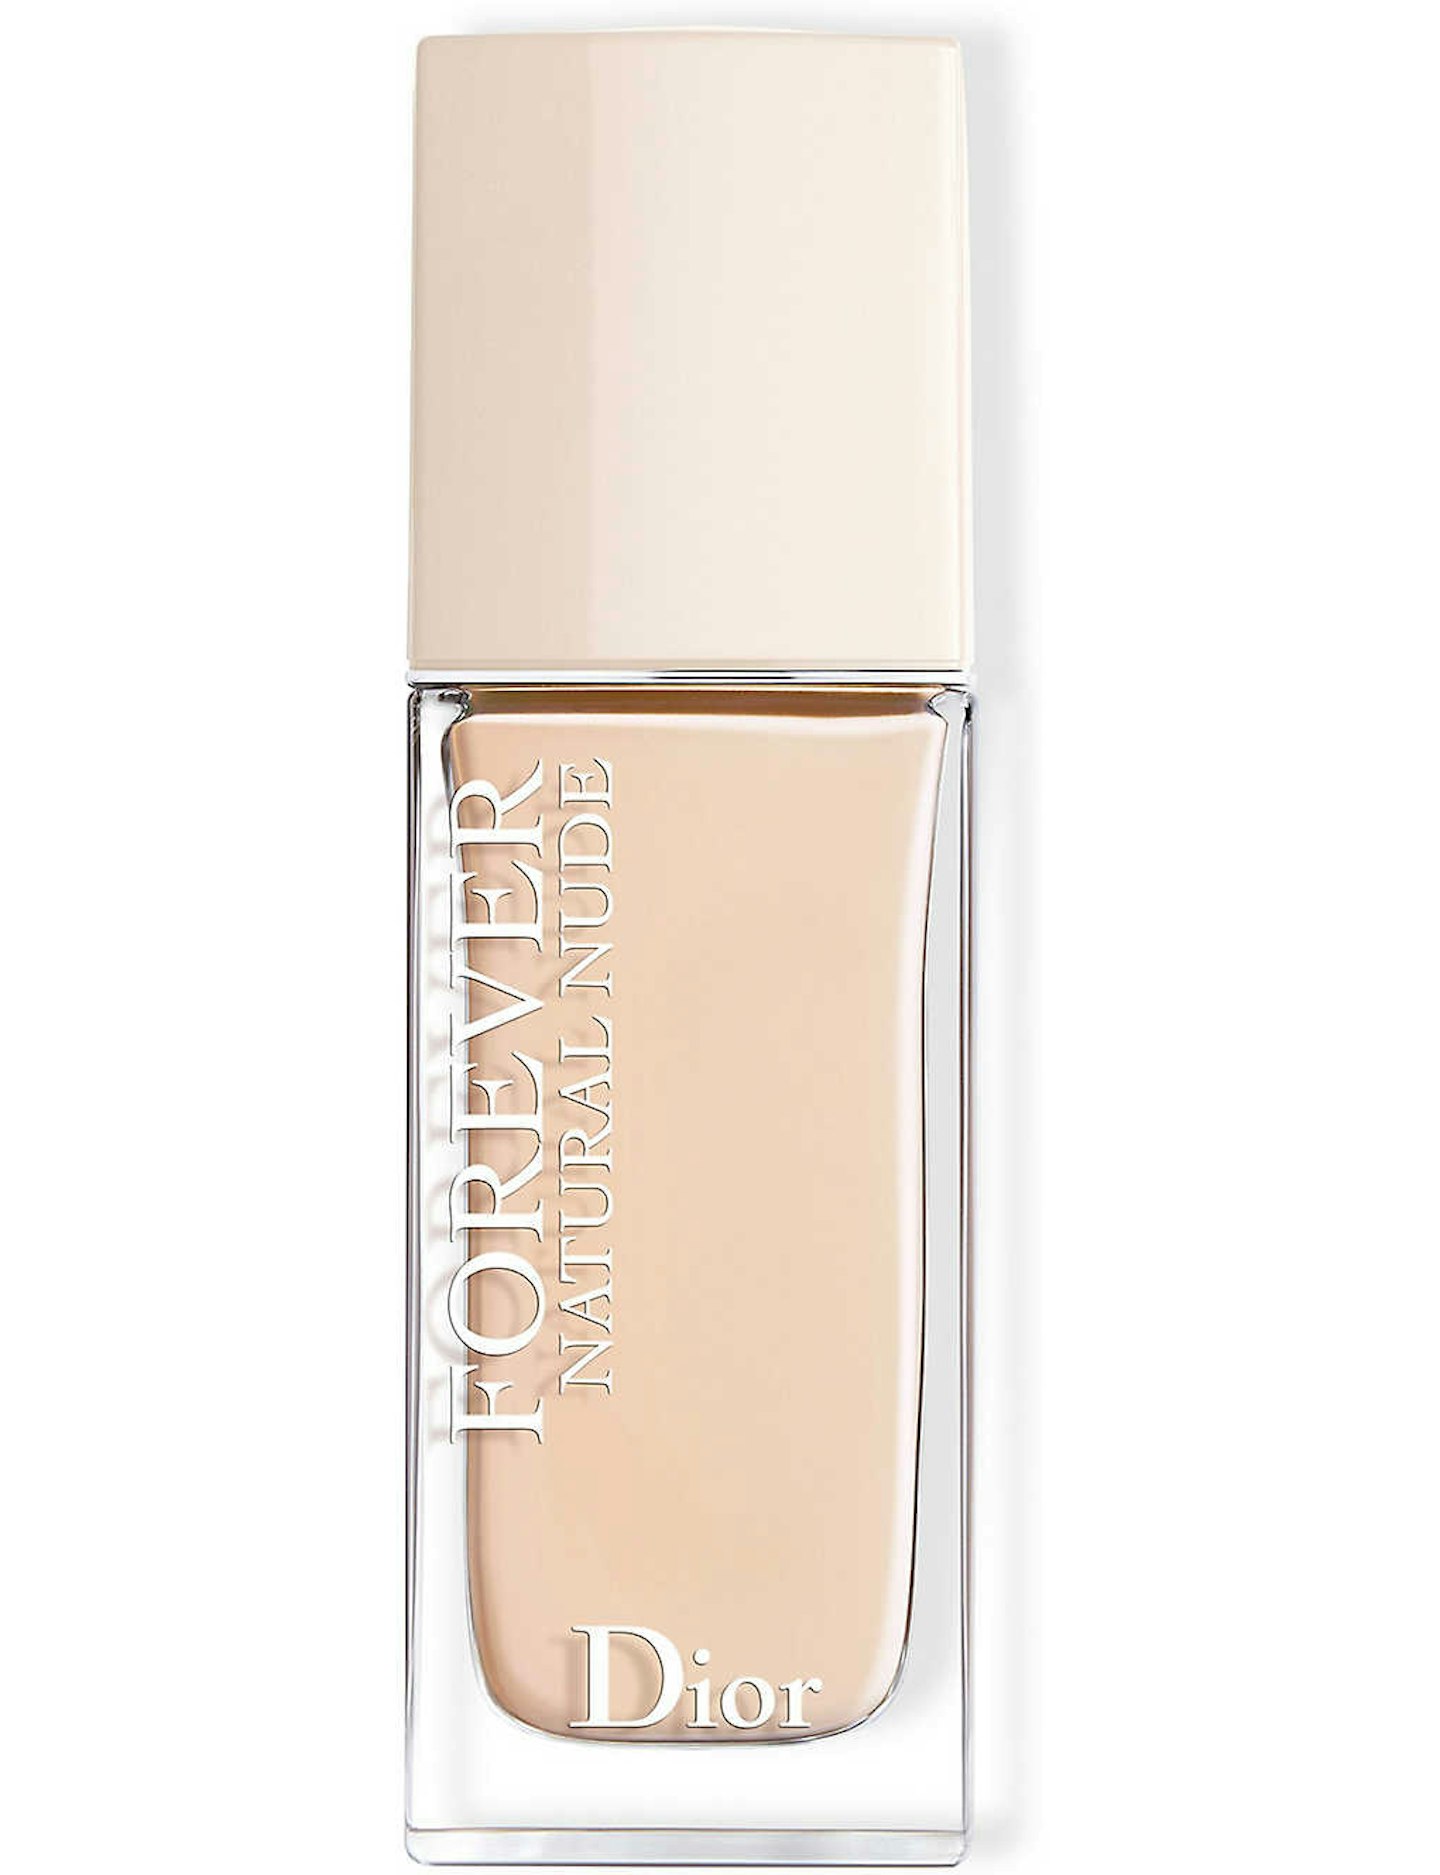 Dior Forever Natural Nude Foundation, £39